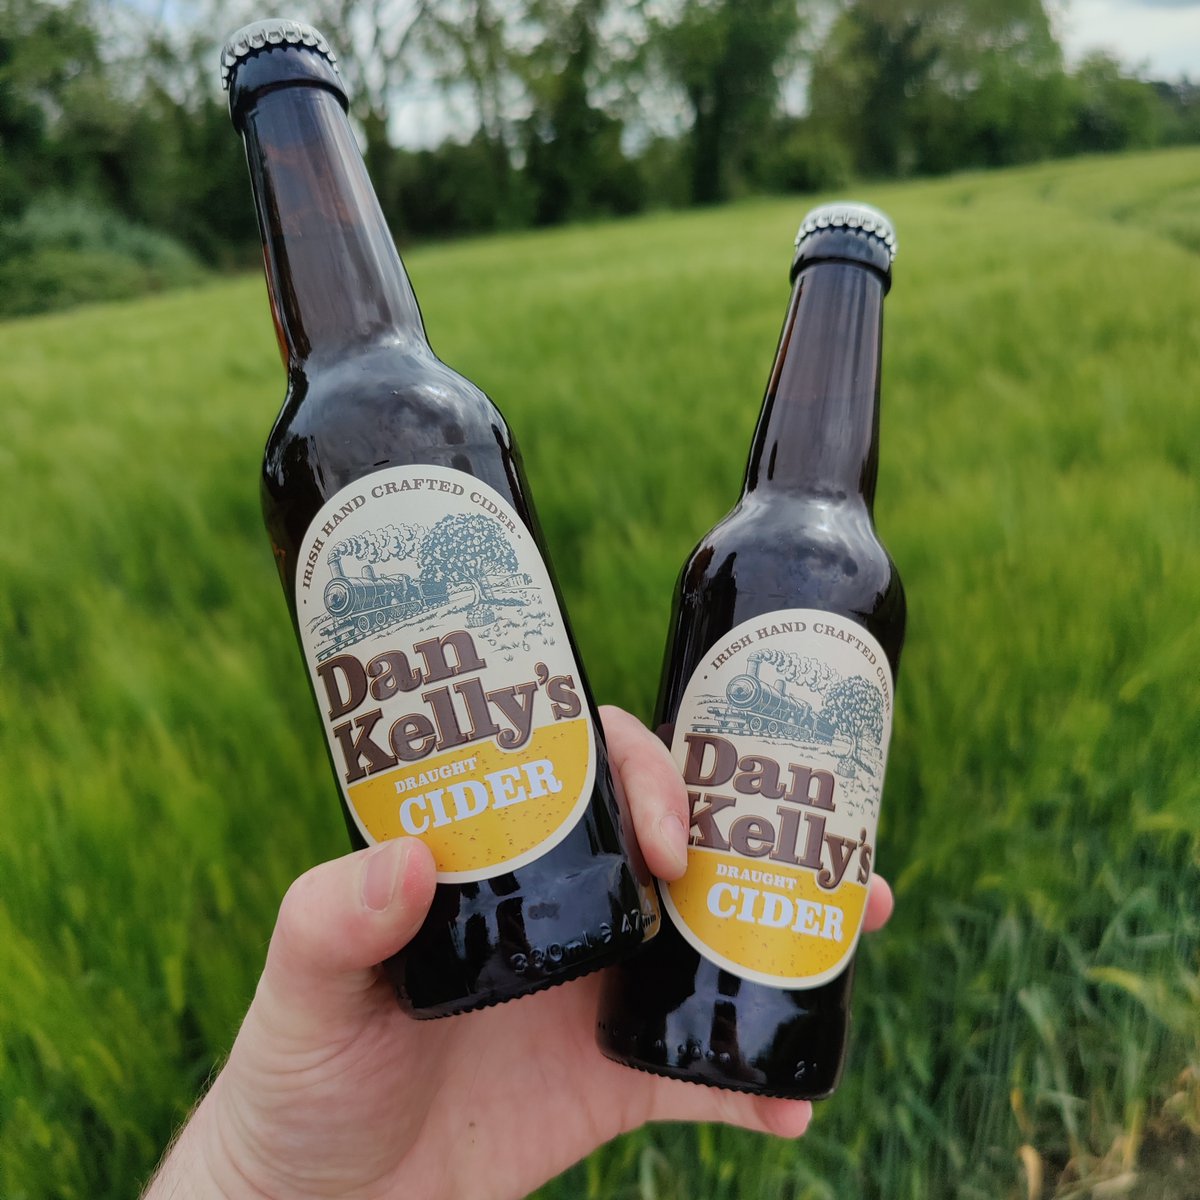 So... what are your plans for the Bank Holiday Weekend? We will be enjoying our delicious draught cider 🍻 This blend was originally designated for our kegs only, but we decided to bottle it too it so you can enjoy at home or in the pub!

#DanKellysCider